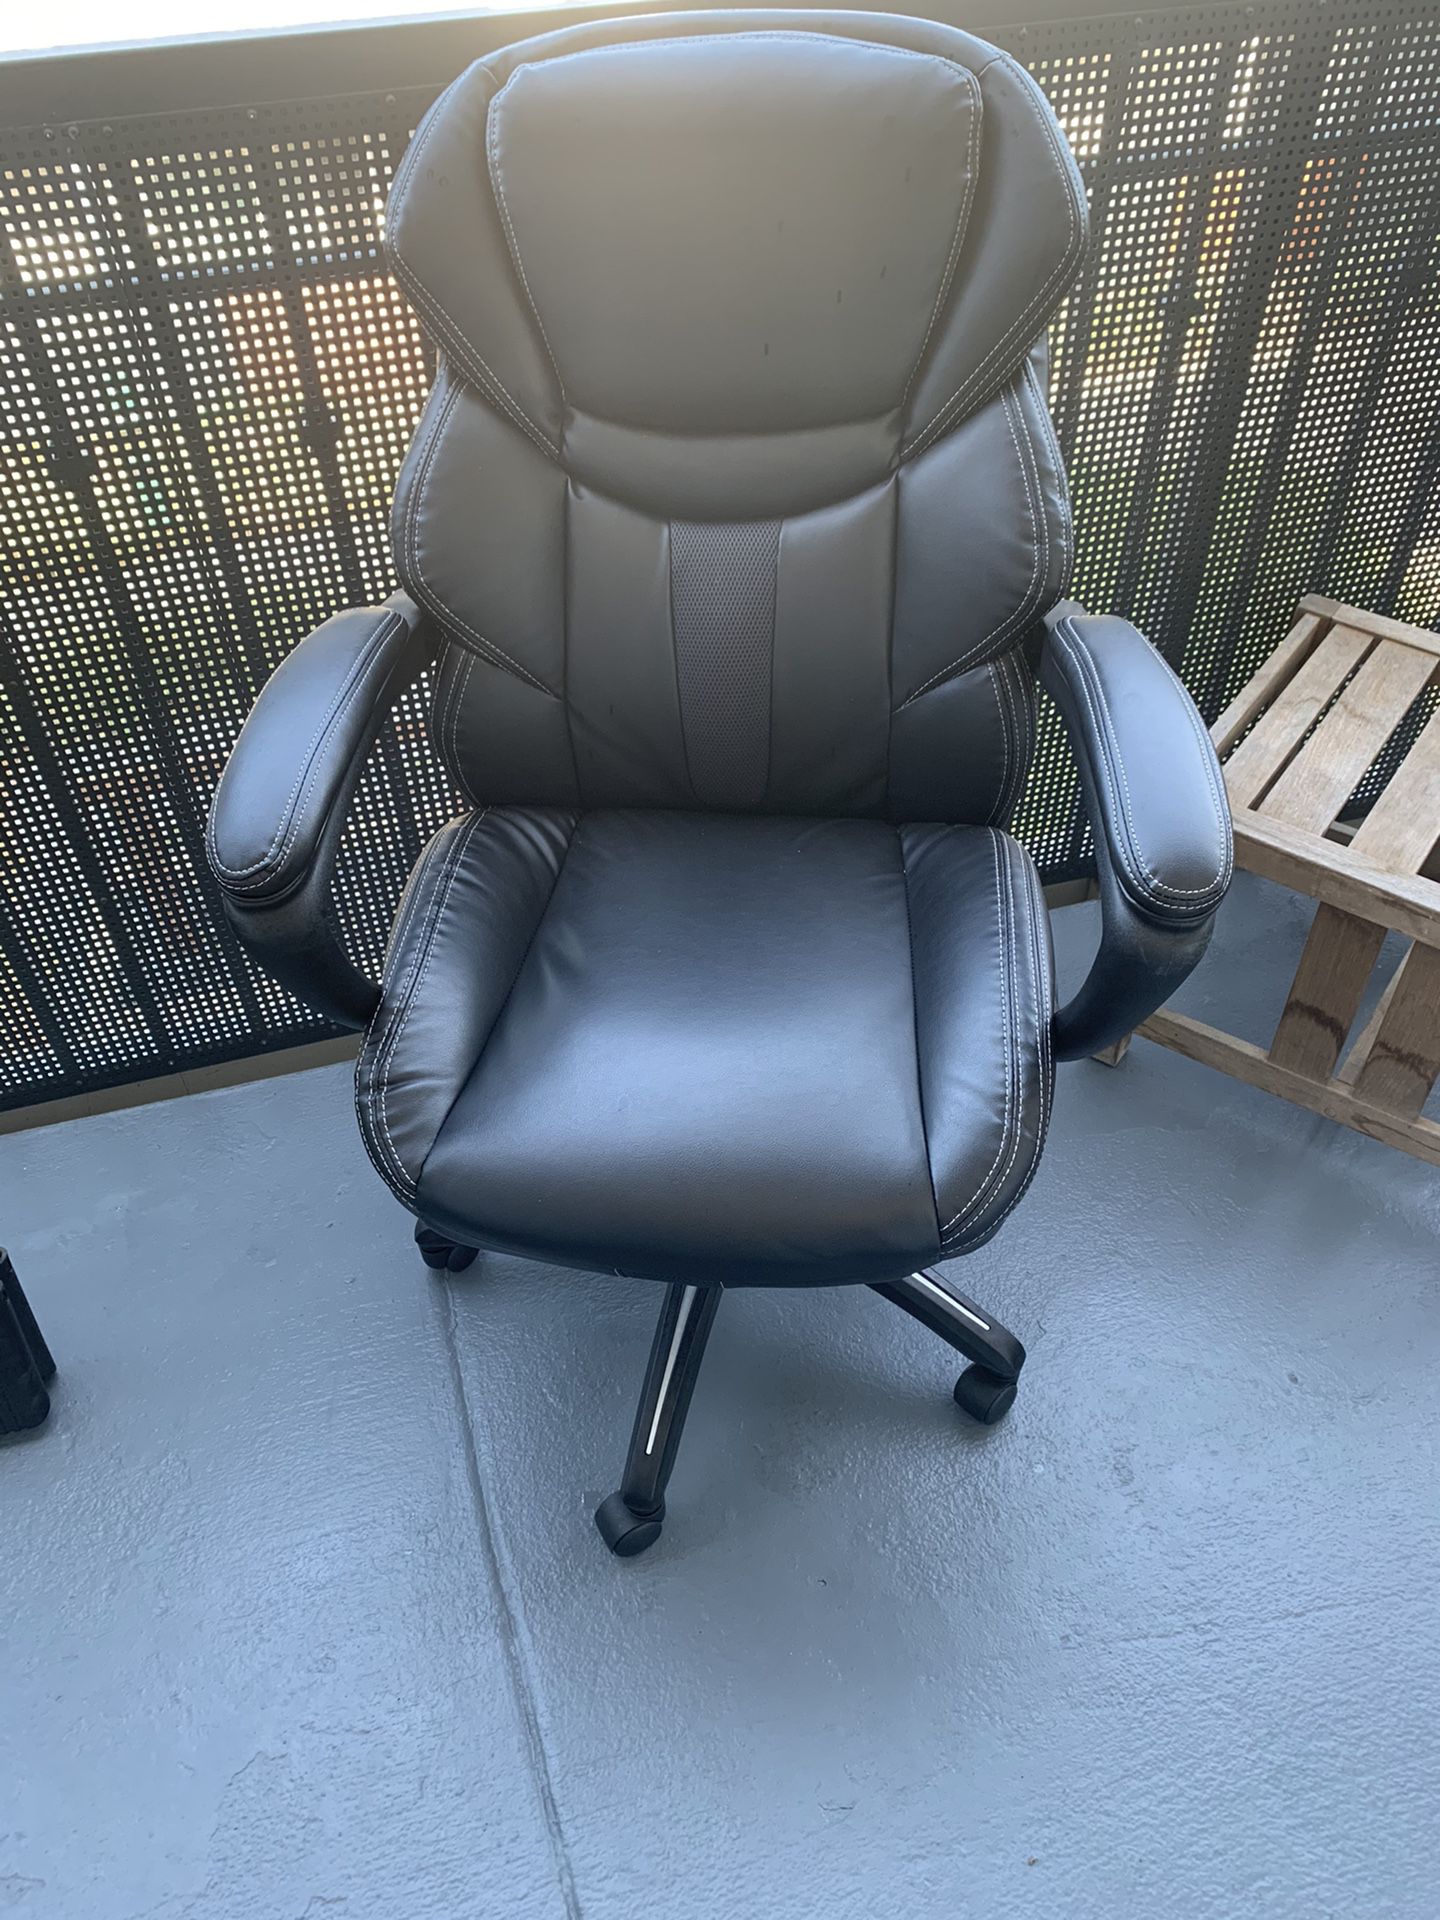 Office Chair new! Don’t need